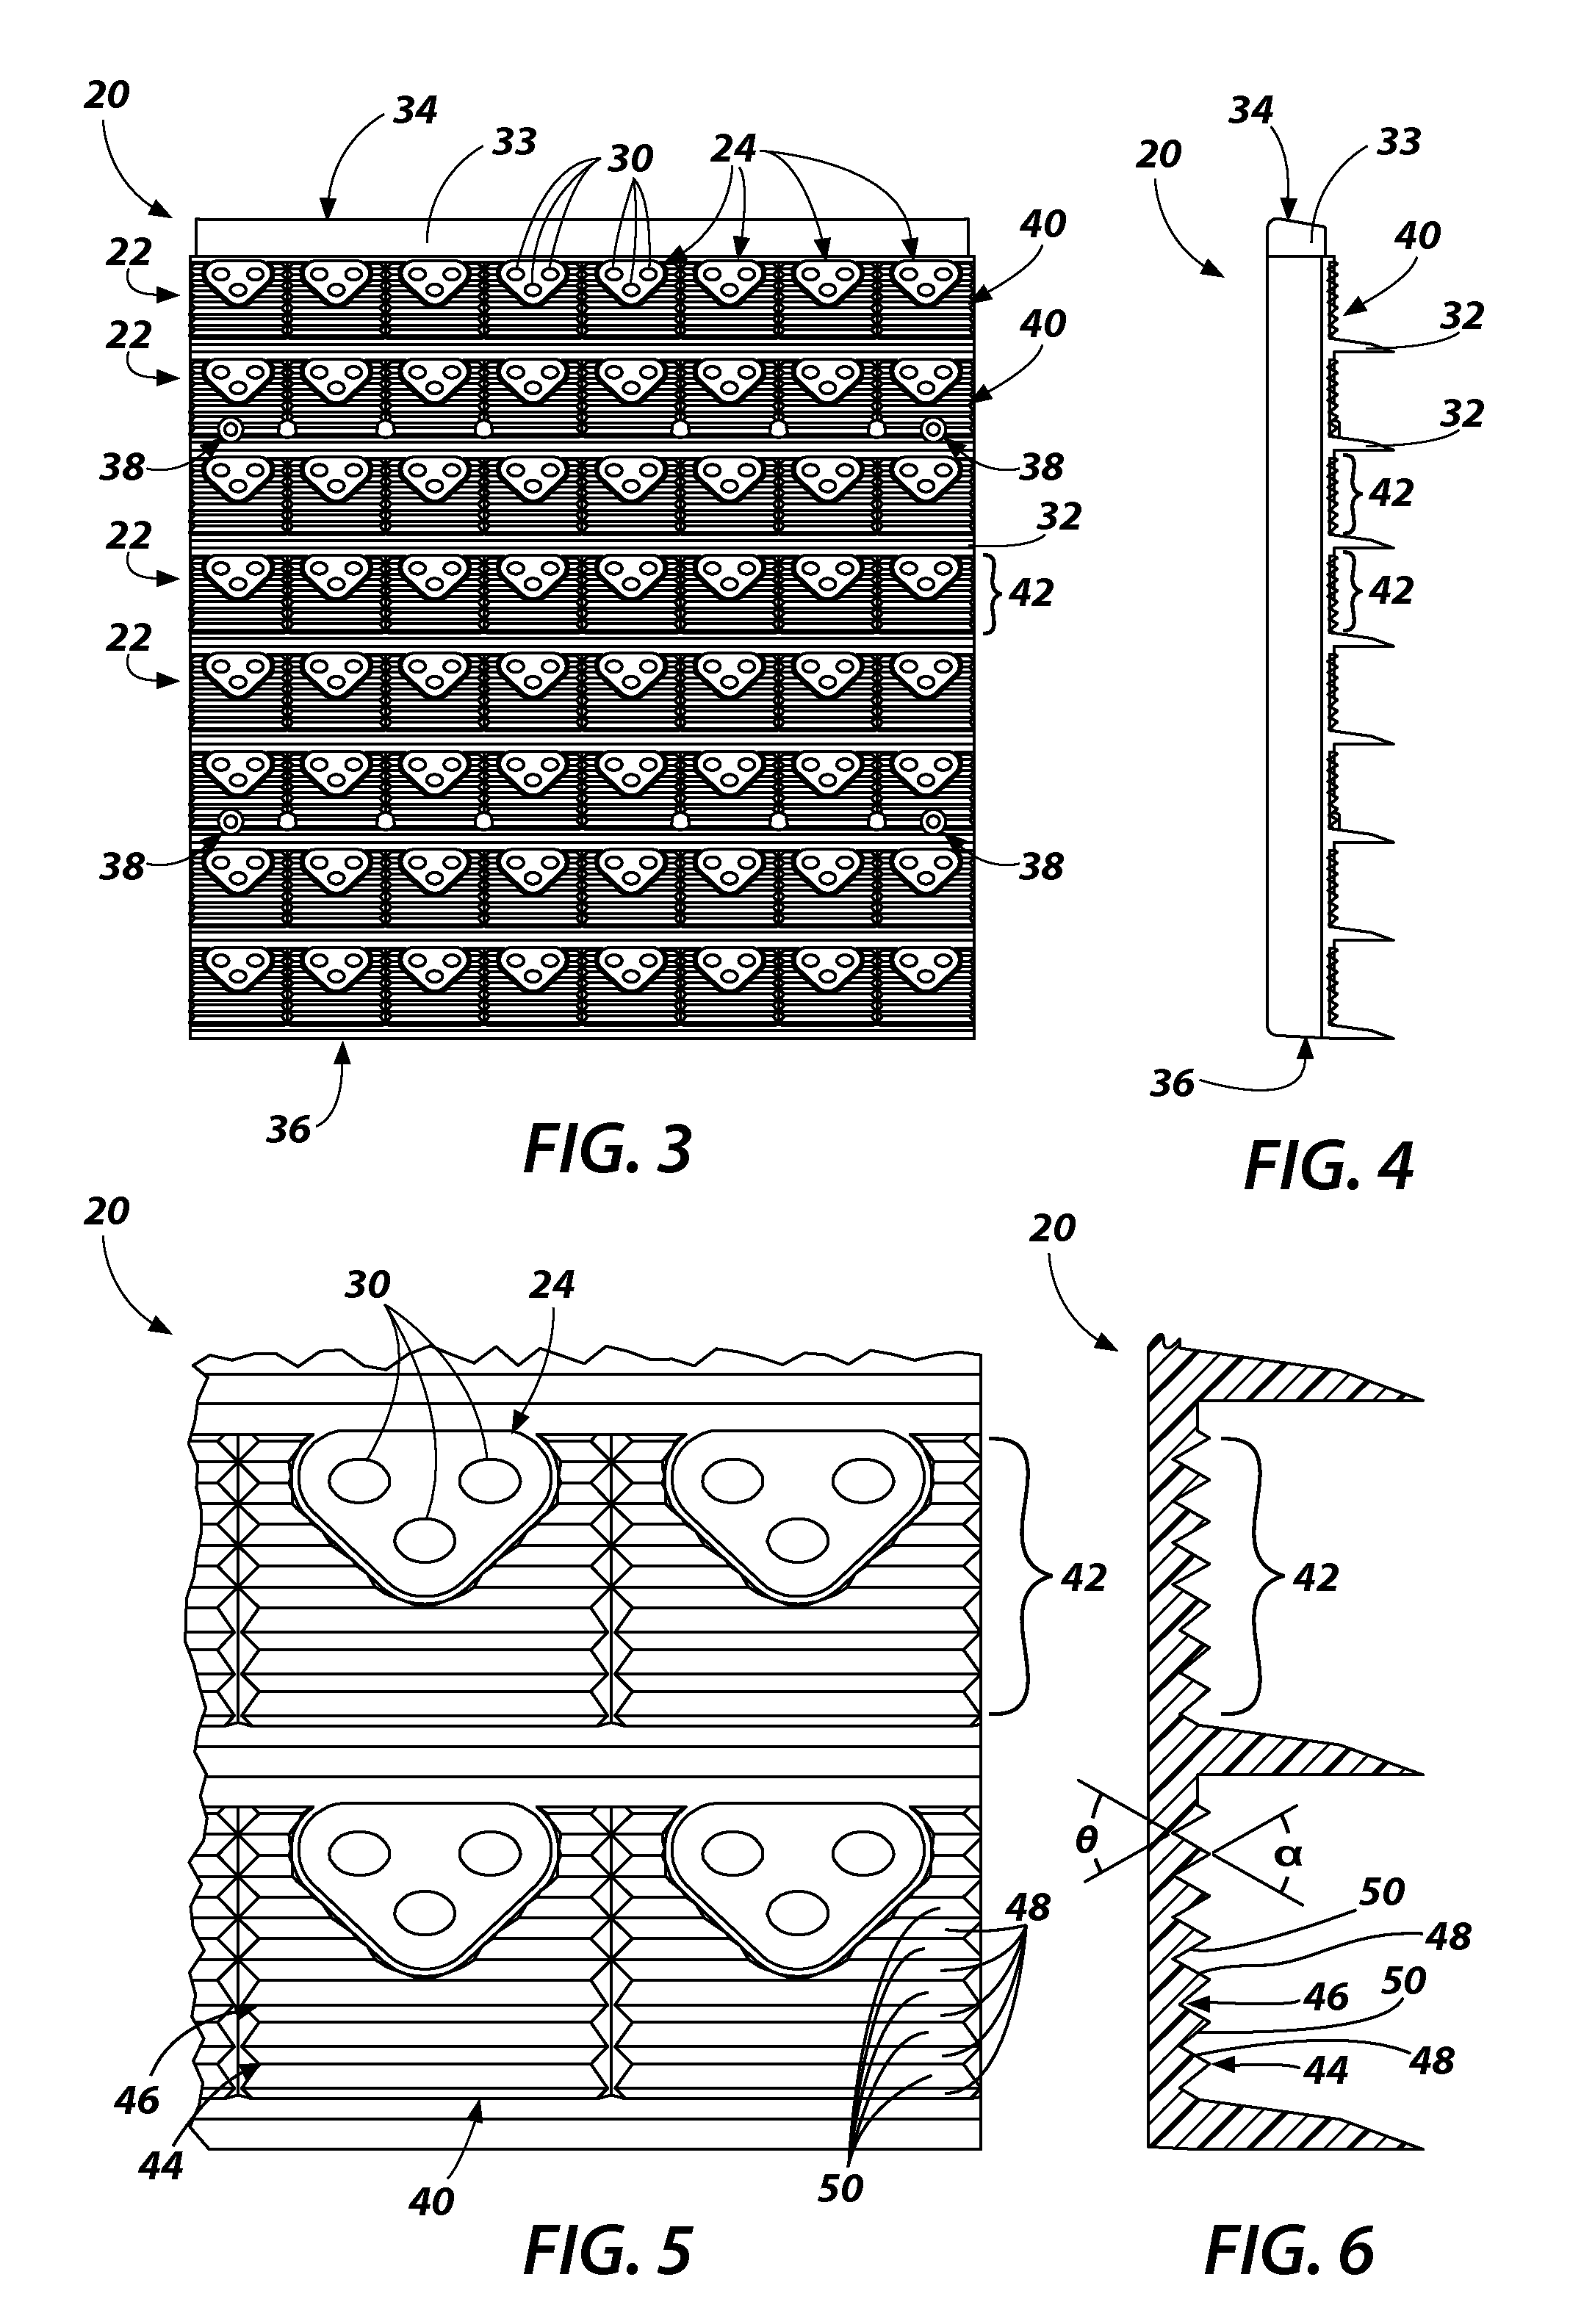 Incident light management devices and related methods and systems